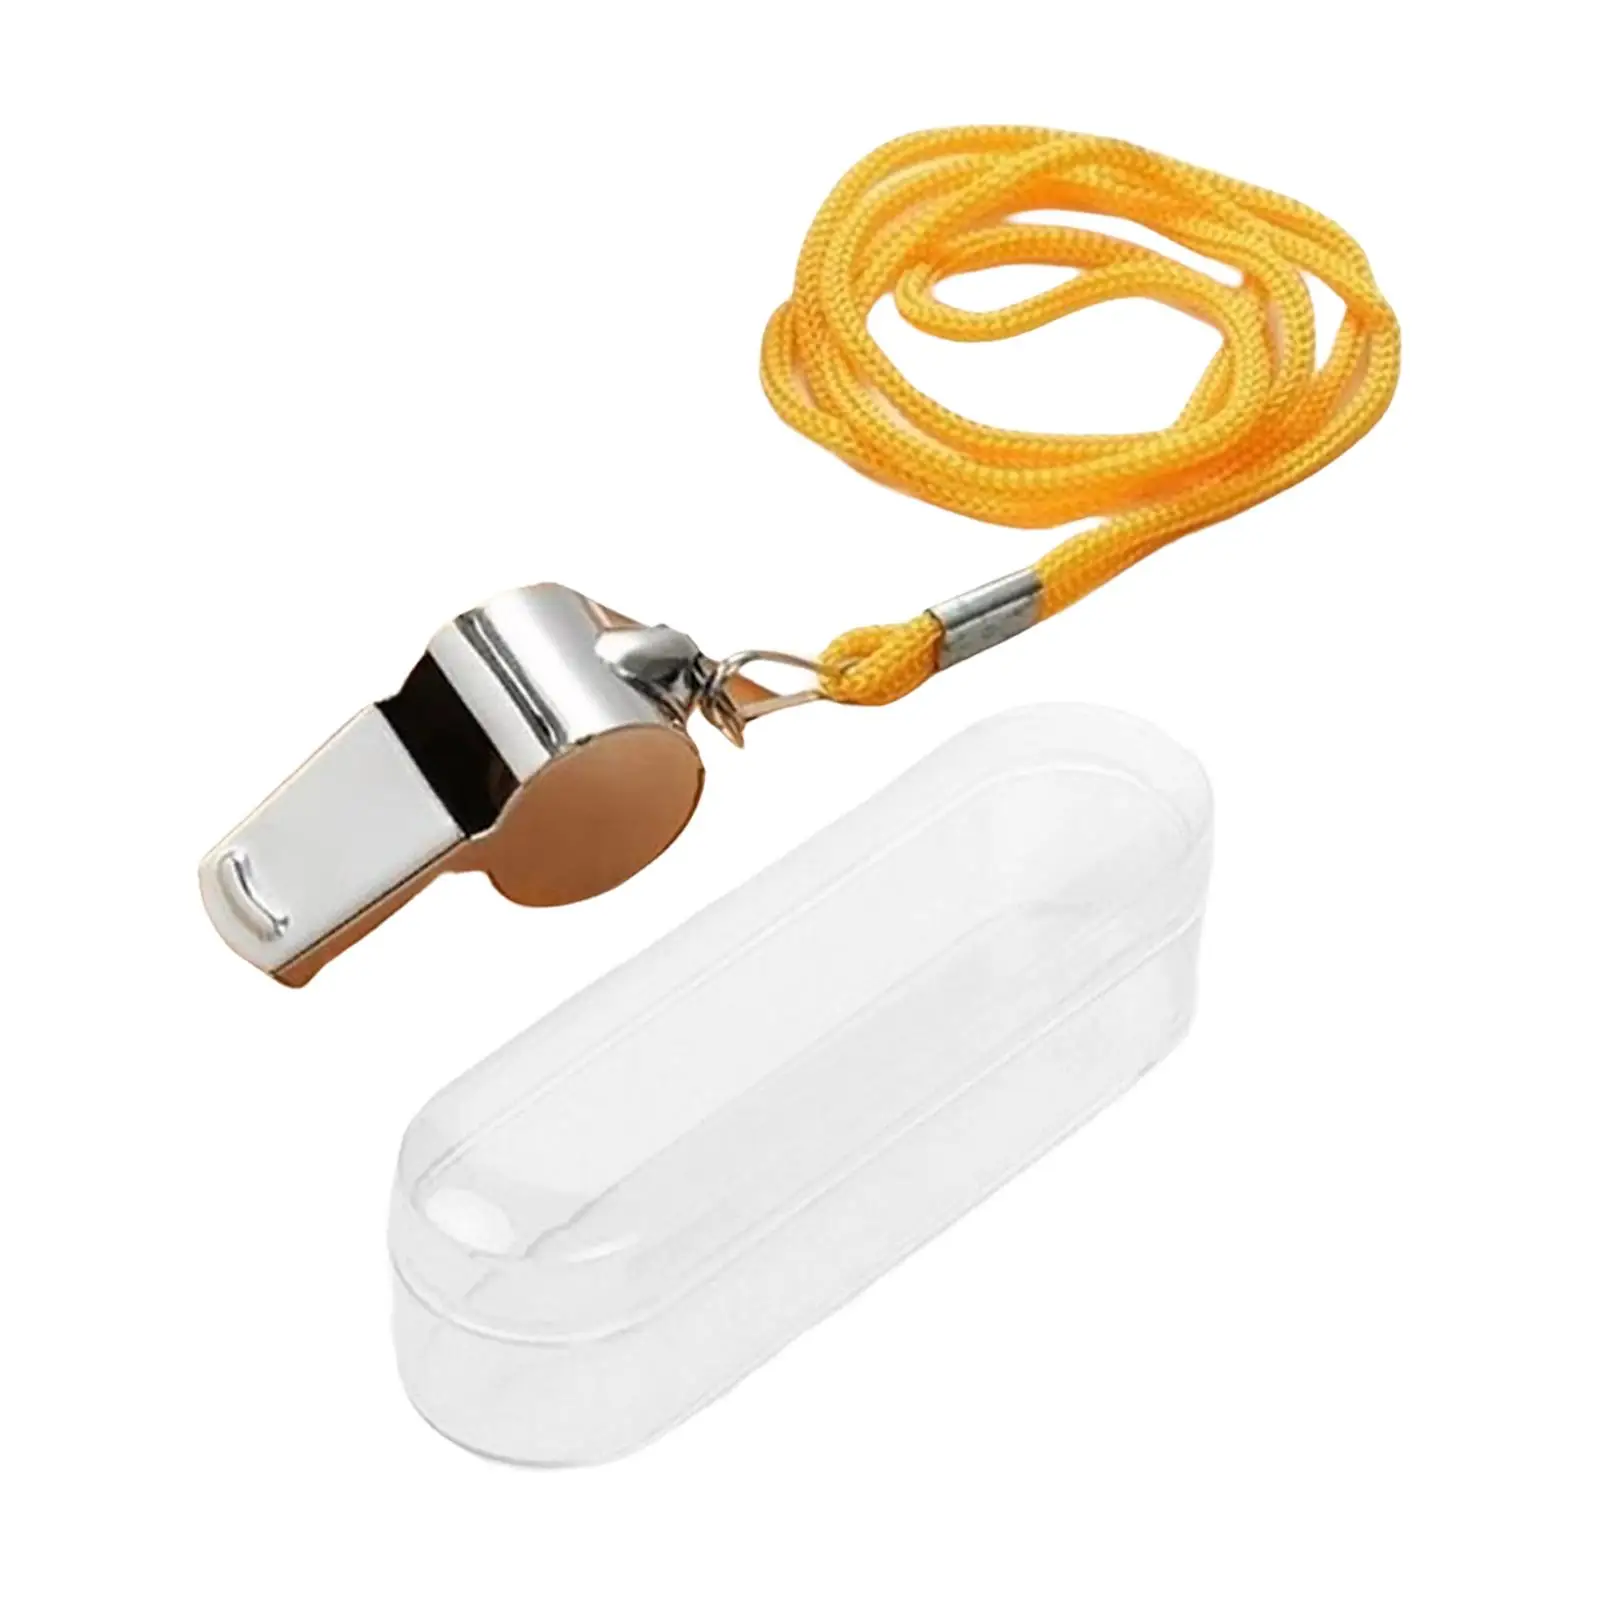 Sports Whistles with Lanyard Loud Crisp Sound Referee Whistle for Dog Training Survival